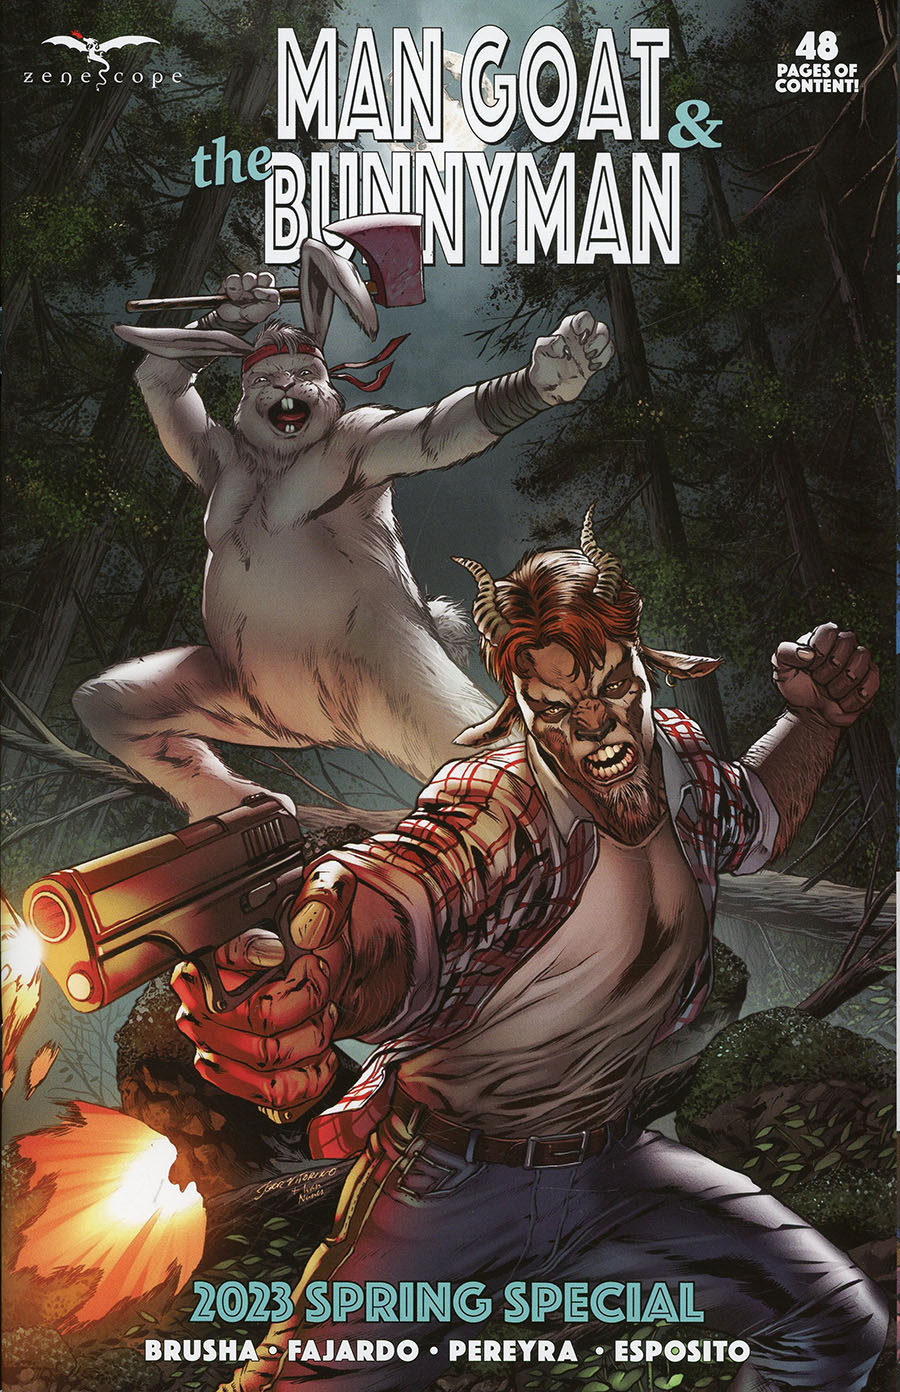 Man Goat And The Bunnyman 2023 Special #1 (One Shot) Cover A Igor Vitorino